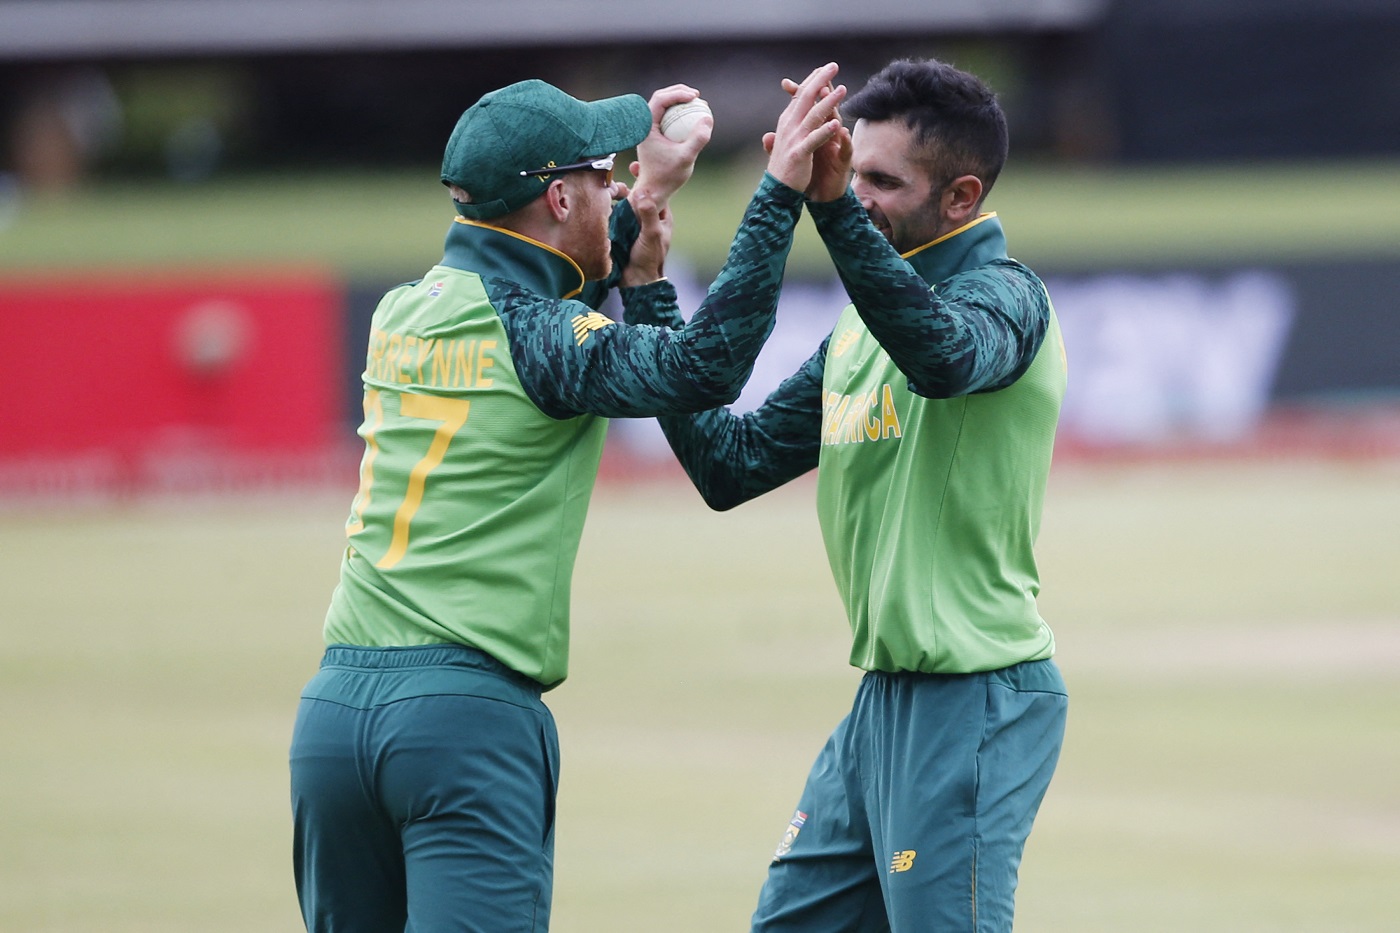 SA vs PAK | South Africa erred by bowling ‘one too many overs’ of spin at the death, admits Mark Boucher